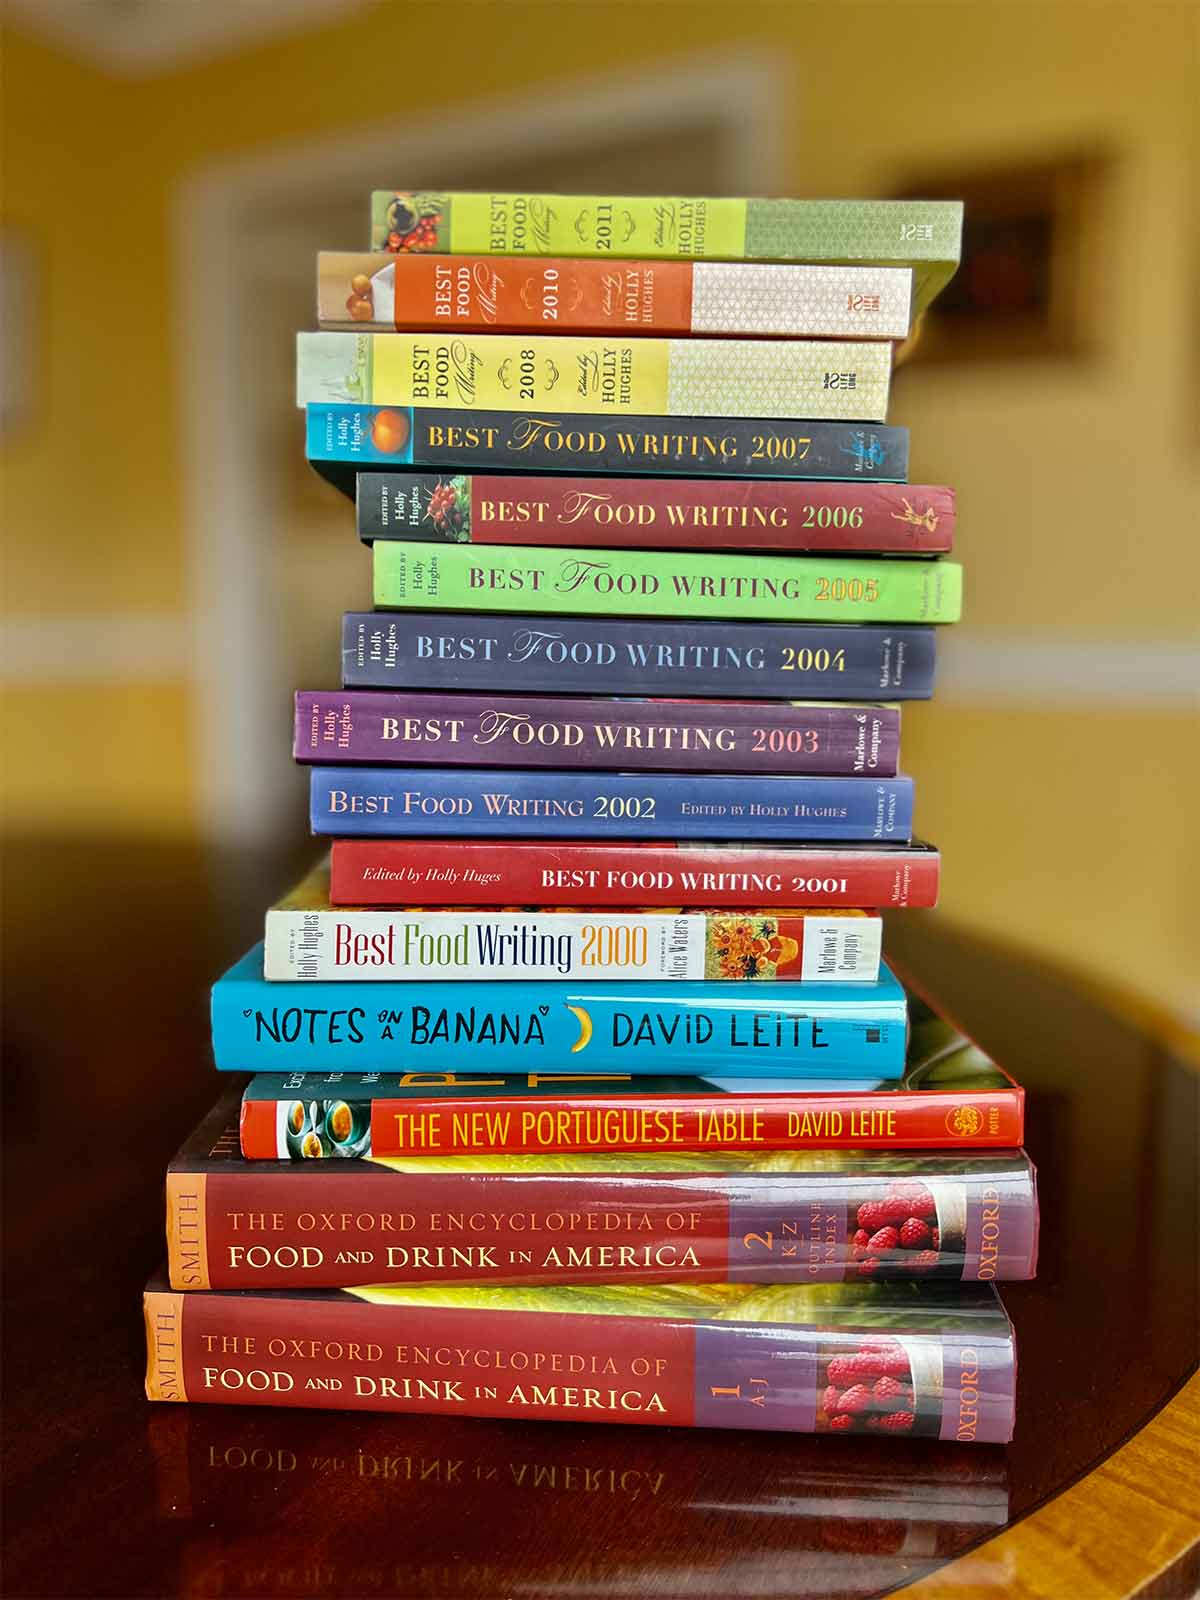 A pile of food books, cookbooks, and encyclopedias that feature David Leite's work.